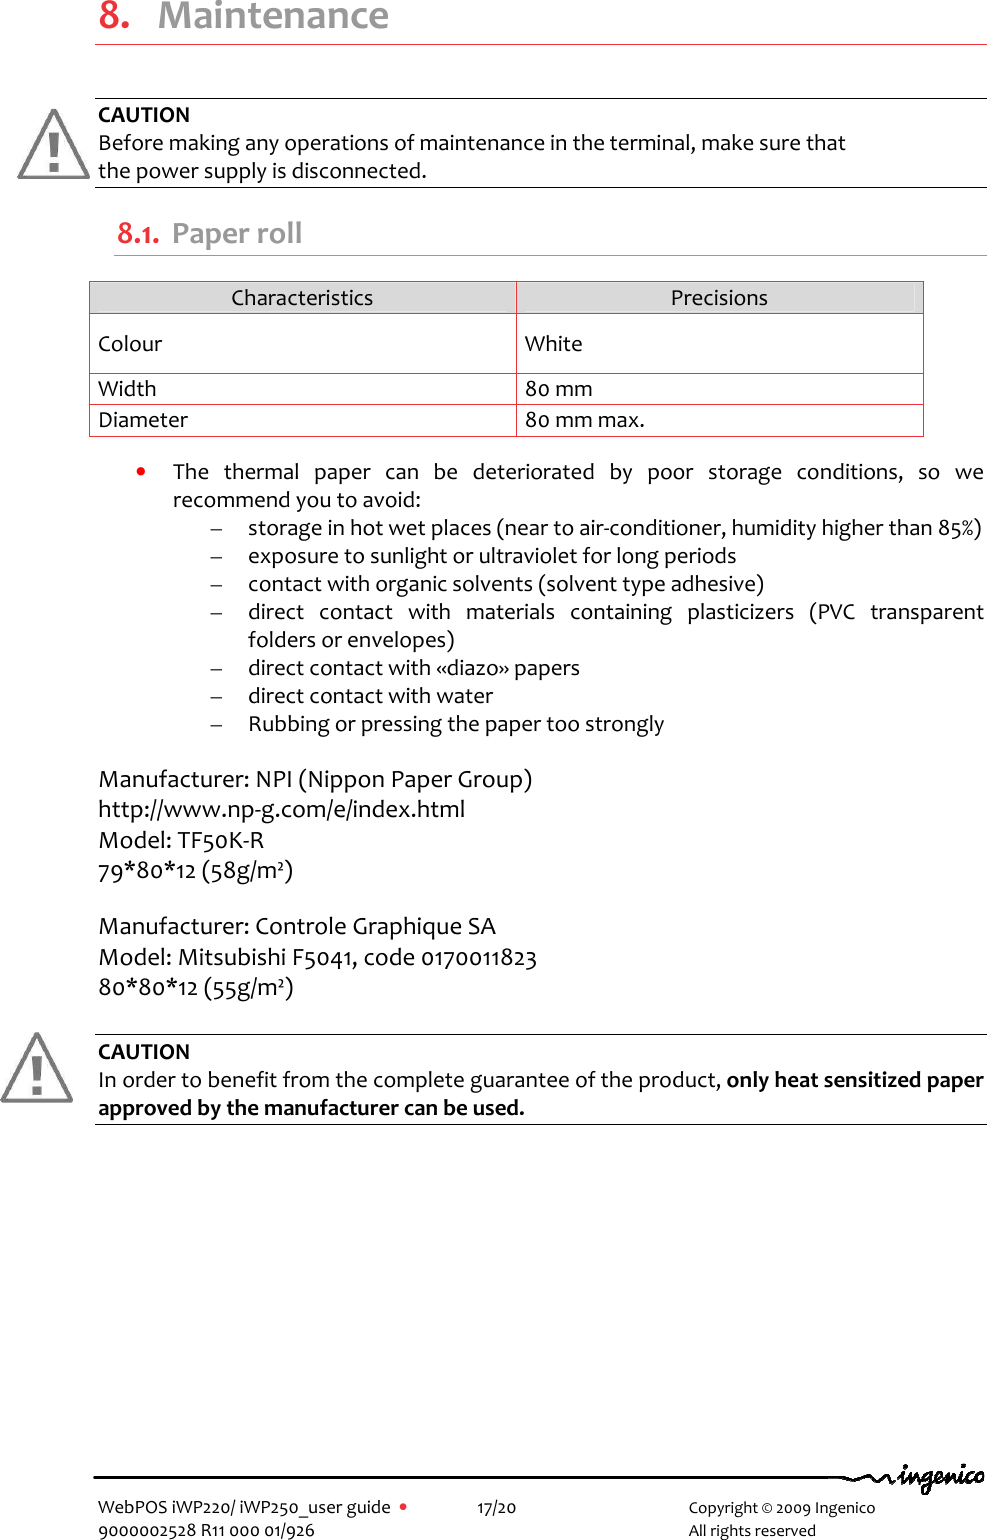   WebPOS iWP220/ iWP250_user guide  •    17/20       Copyright © 2009 Ingenico 9000002528 R11 000 01/926       All rights reserved                8. Maintenance  CAUTION Before making any operations of maintenance in the terminal, make sure that  the power supply is disconnected. 8.1. Paper roll Characteristics  Precisions Colour  White Width  80 mm Diameter  80 mm max.  • The  thermal  paper  can  be  deteriorated  by  poor  storage  conditions,  so  we recommend you to avoid: – storage in hot wet places (near to air-conditioner, humidity higher than 85%) – exposure to sunlight or ultraviolet for long periods – contact with organic solvents (solvent type adhesive) – direct  contact  with  materials  containing  plasticizers  (PVC  transparent folders or envelopes) – direct contact with «diazo» papers – direct contact with water – Rubbing or pressing the paper too strongly  Manufacturer: NPI (Nippon Paper Group)   http://www.np-g.com/e/index.html Model: TF50K-R 79*80*12 (58g/m²)  Manufacturer: Controle Graphique SA Model: Mitsubishi F5041, code 0170011823 80*80*12 (55g/m²)  CAUTION In order to benefit from the complete guarantee of the product, only heat sensitized paper approved by the manufacturer can be used. 